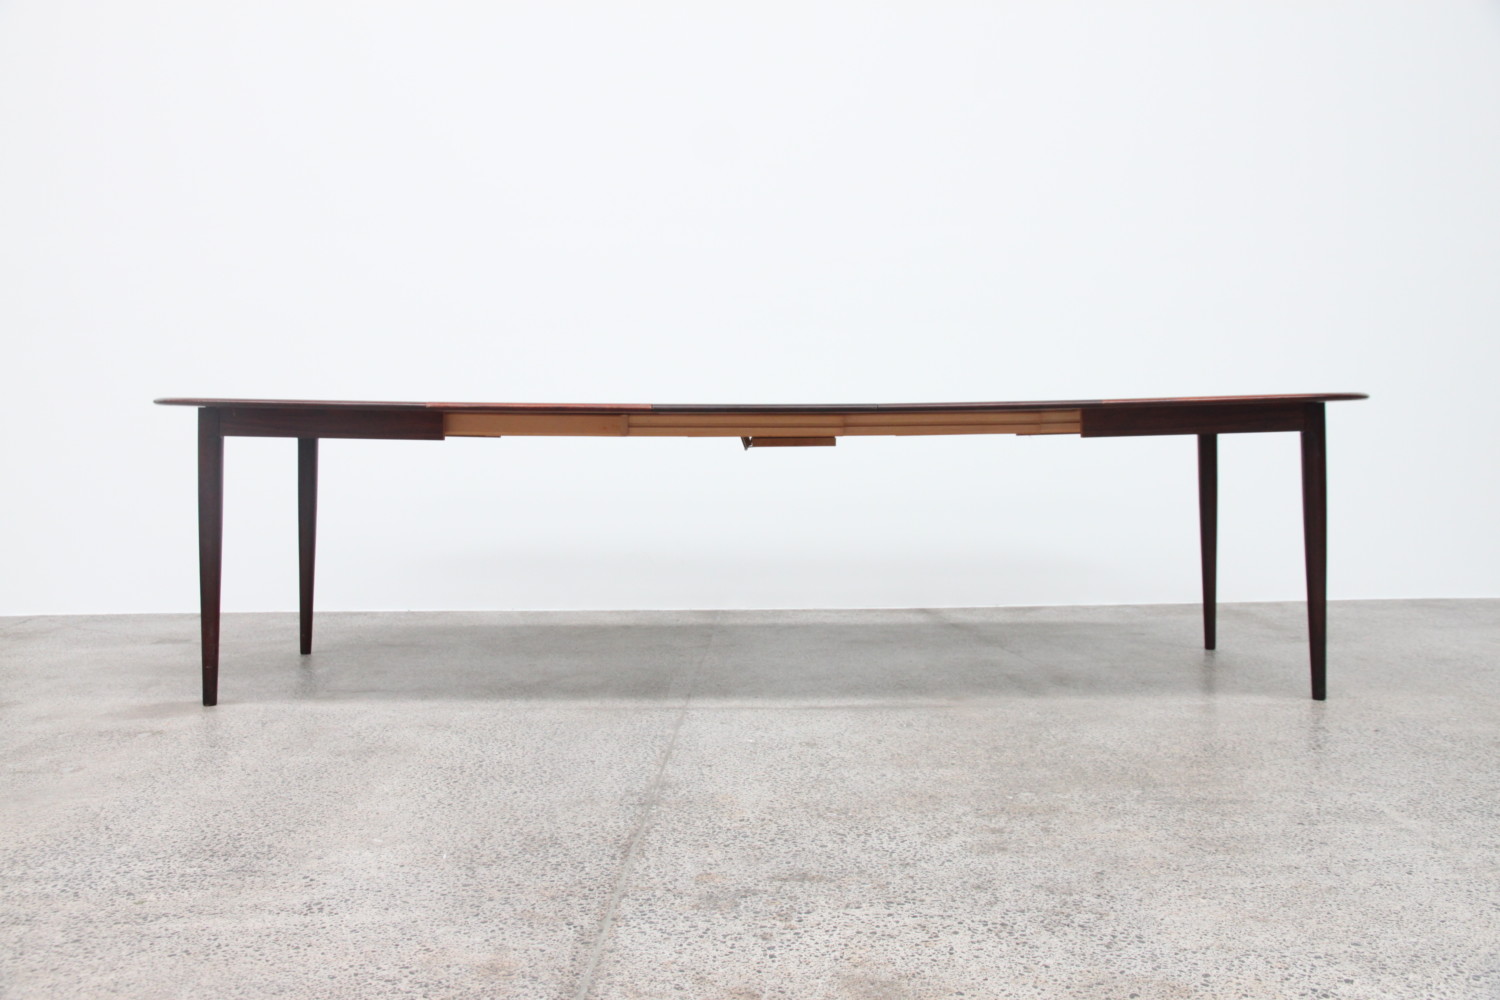 Large Rosewood Banquet Table